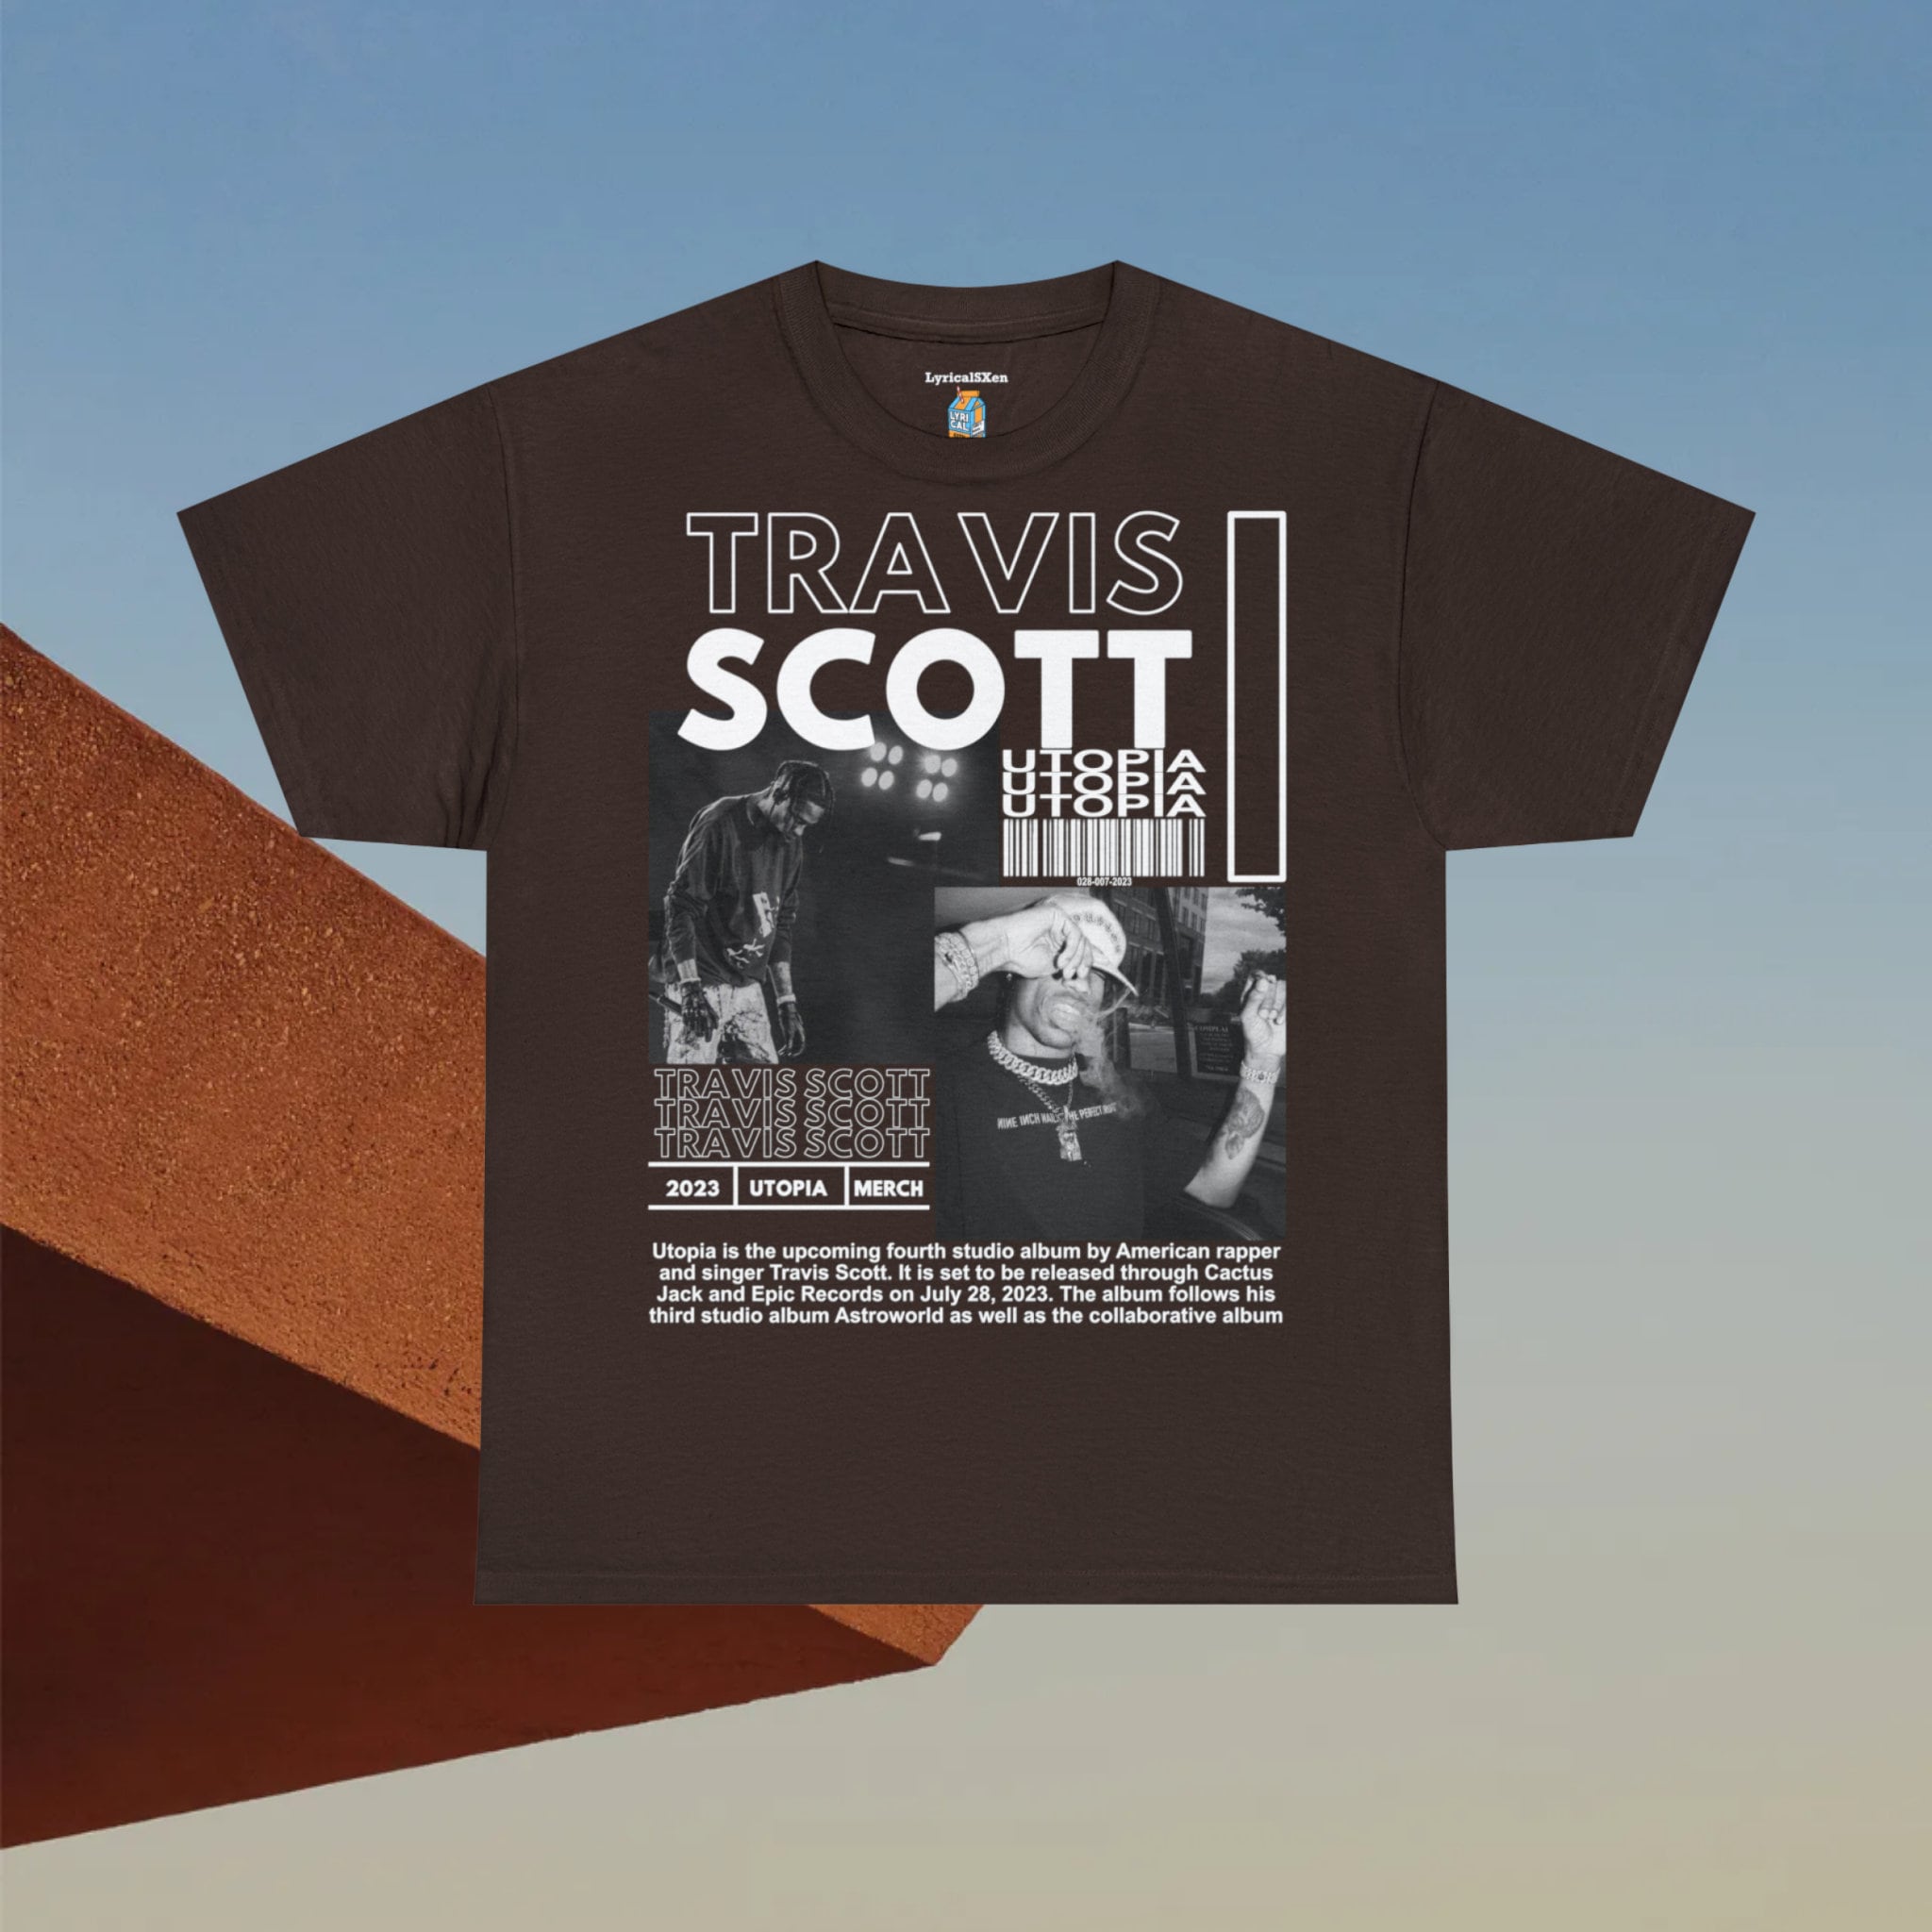 THE TRAVIS SCOTT ASTROWORLD POSTER – Cosmic Clothing